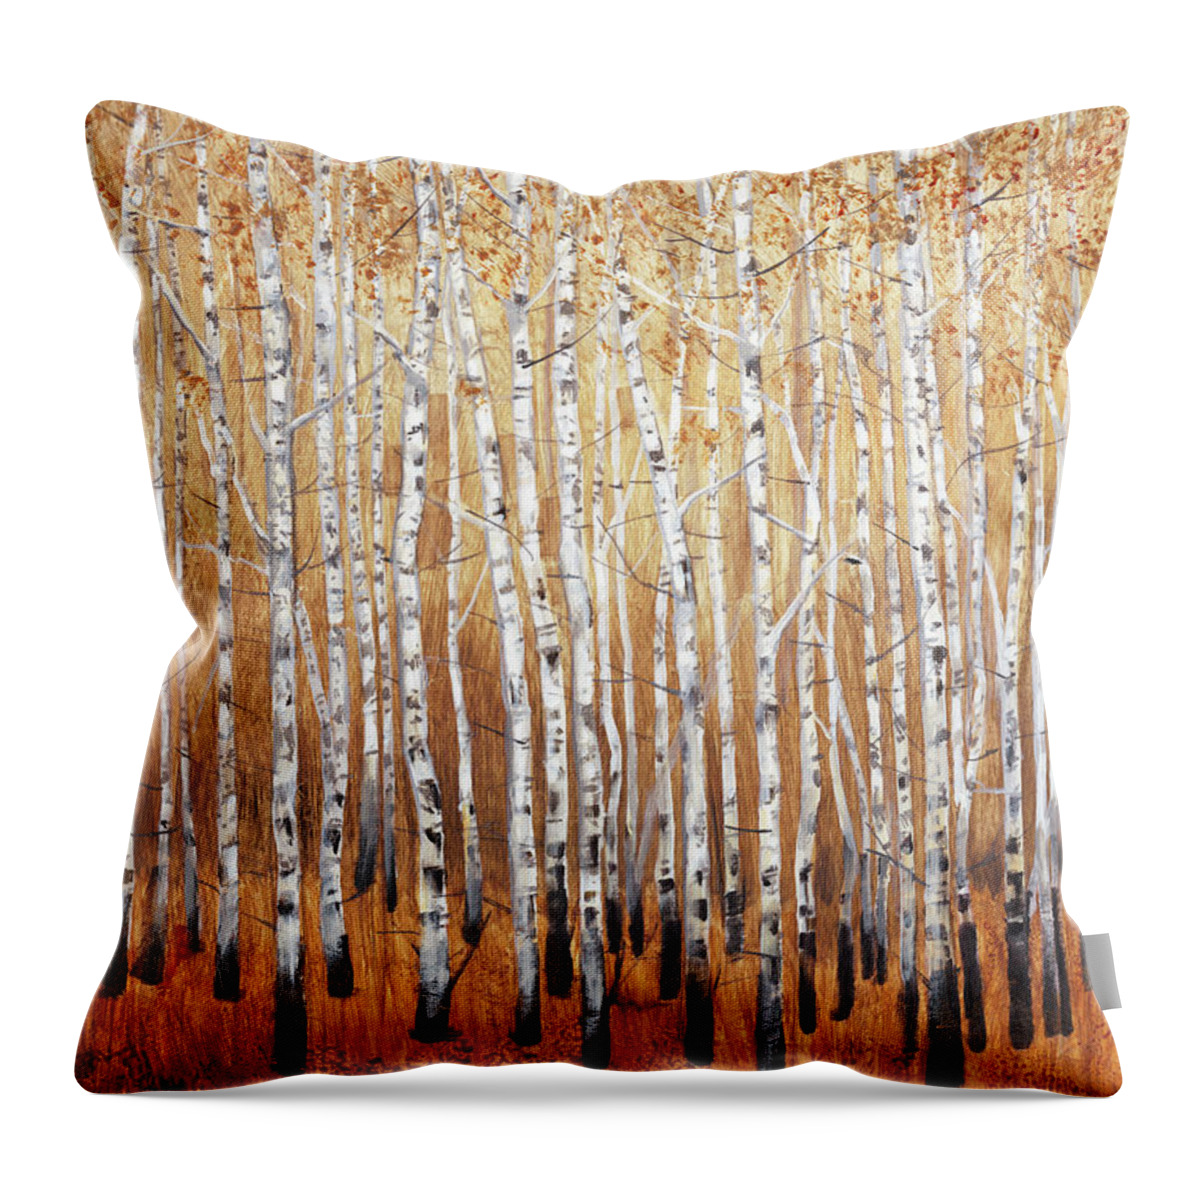 Landscapes Throw Pillow featuring the painting Sienna Birches I by Tim Otoole